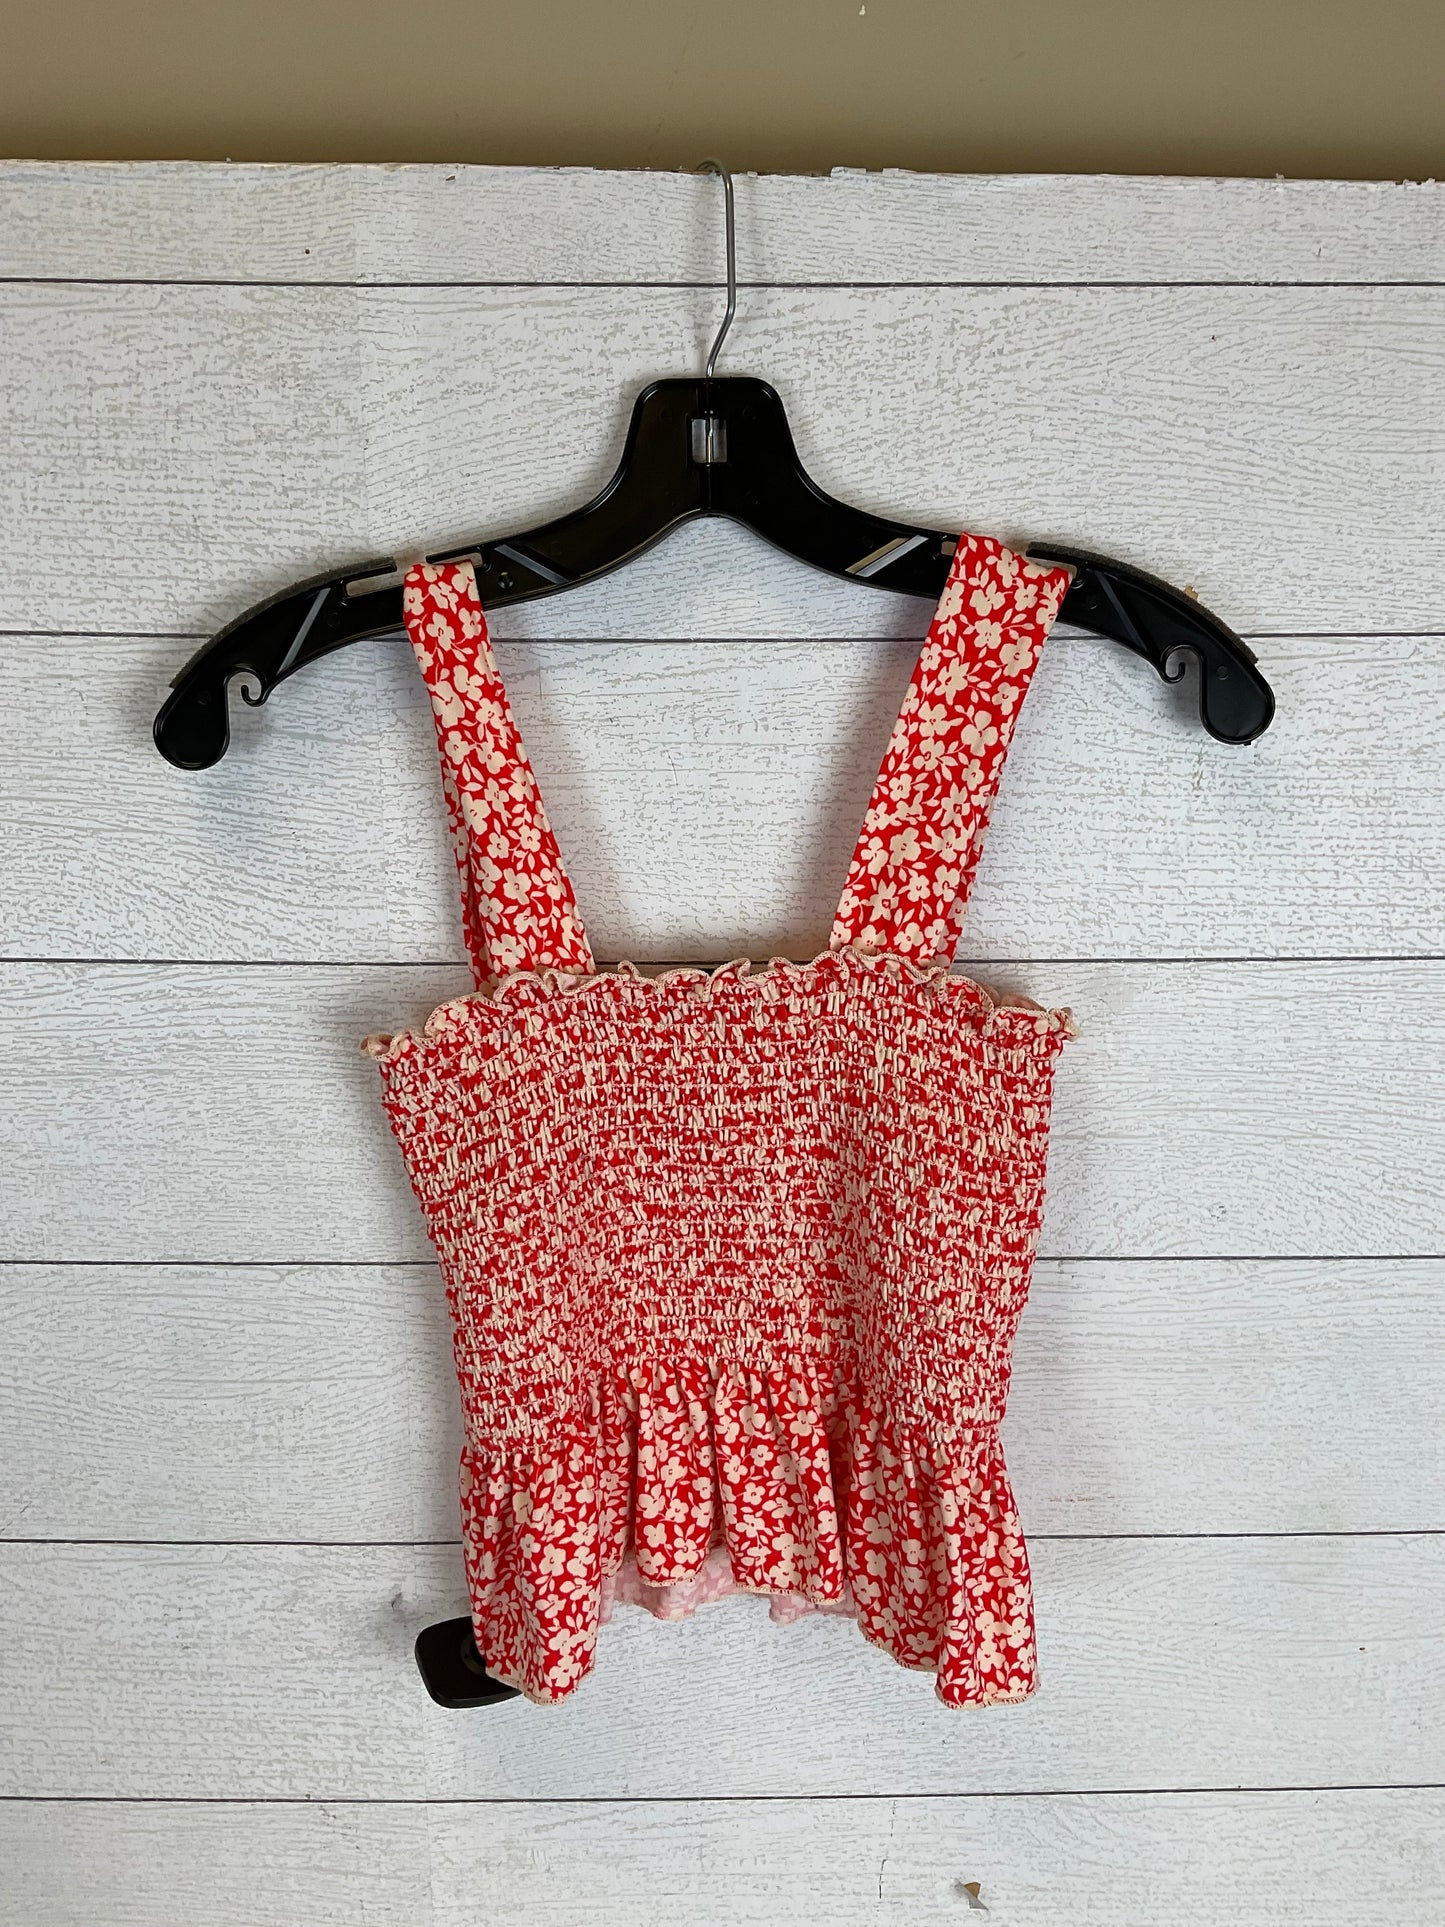 Red Top Sleeveless Urban Outfitters, Size S